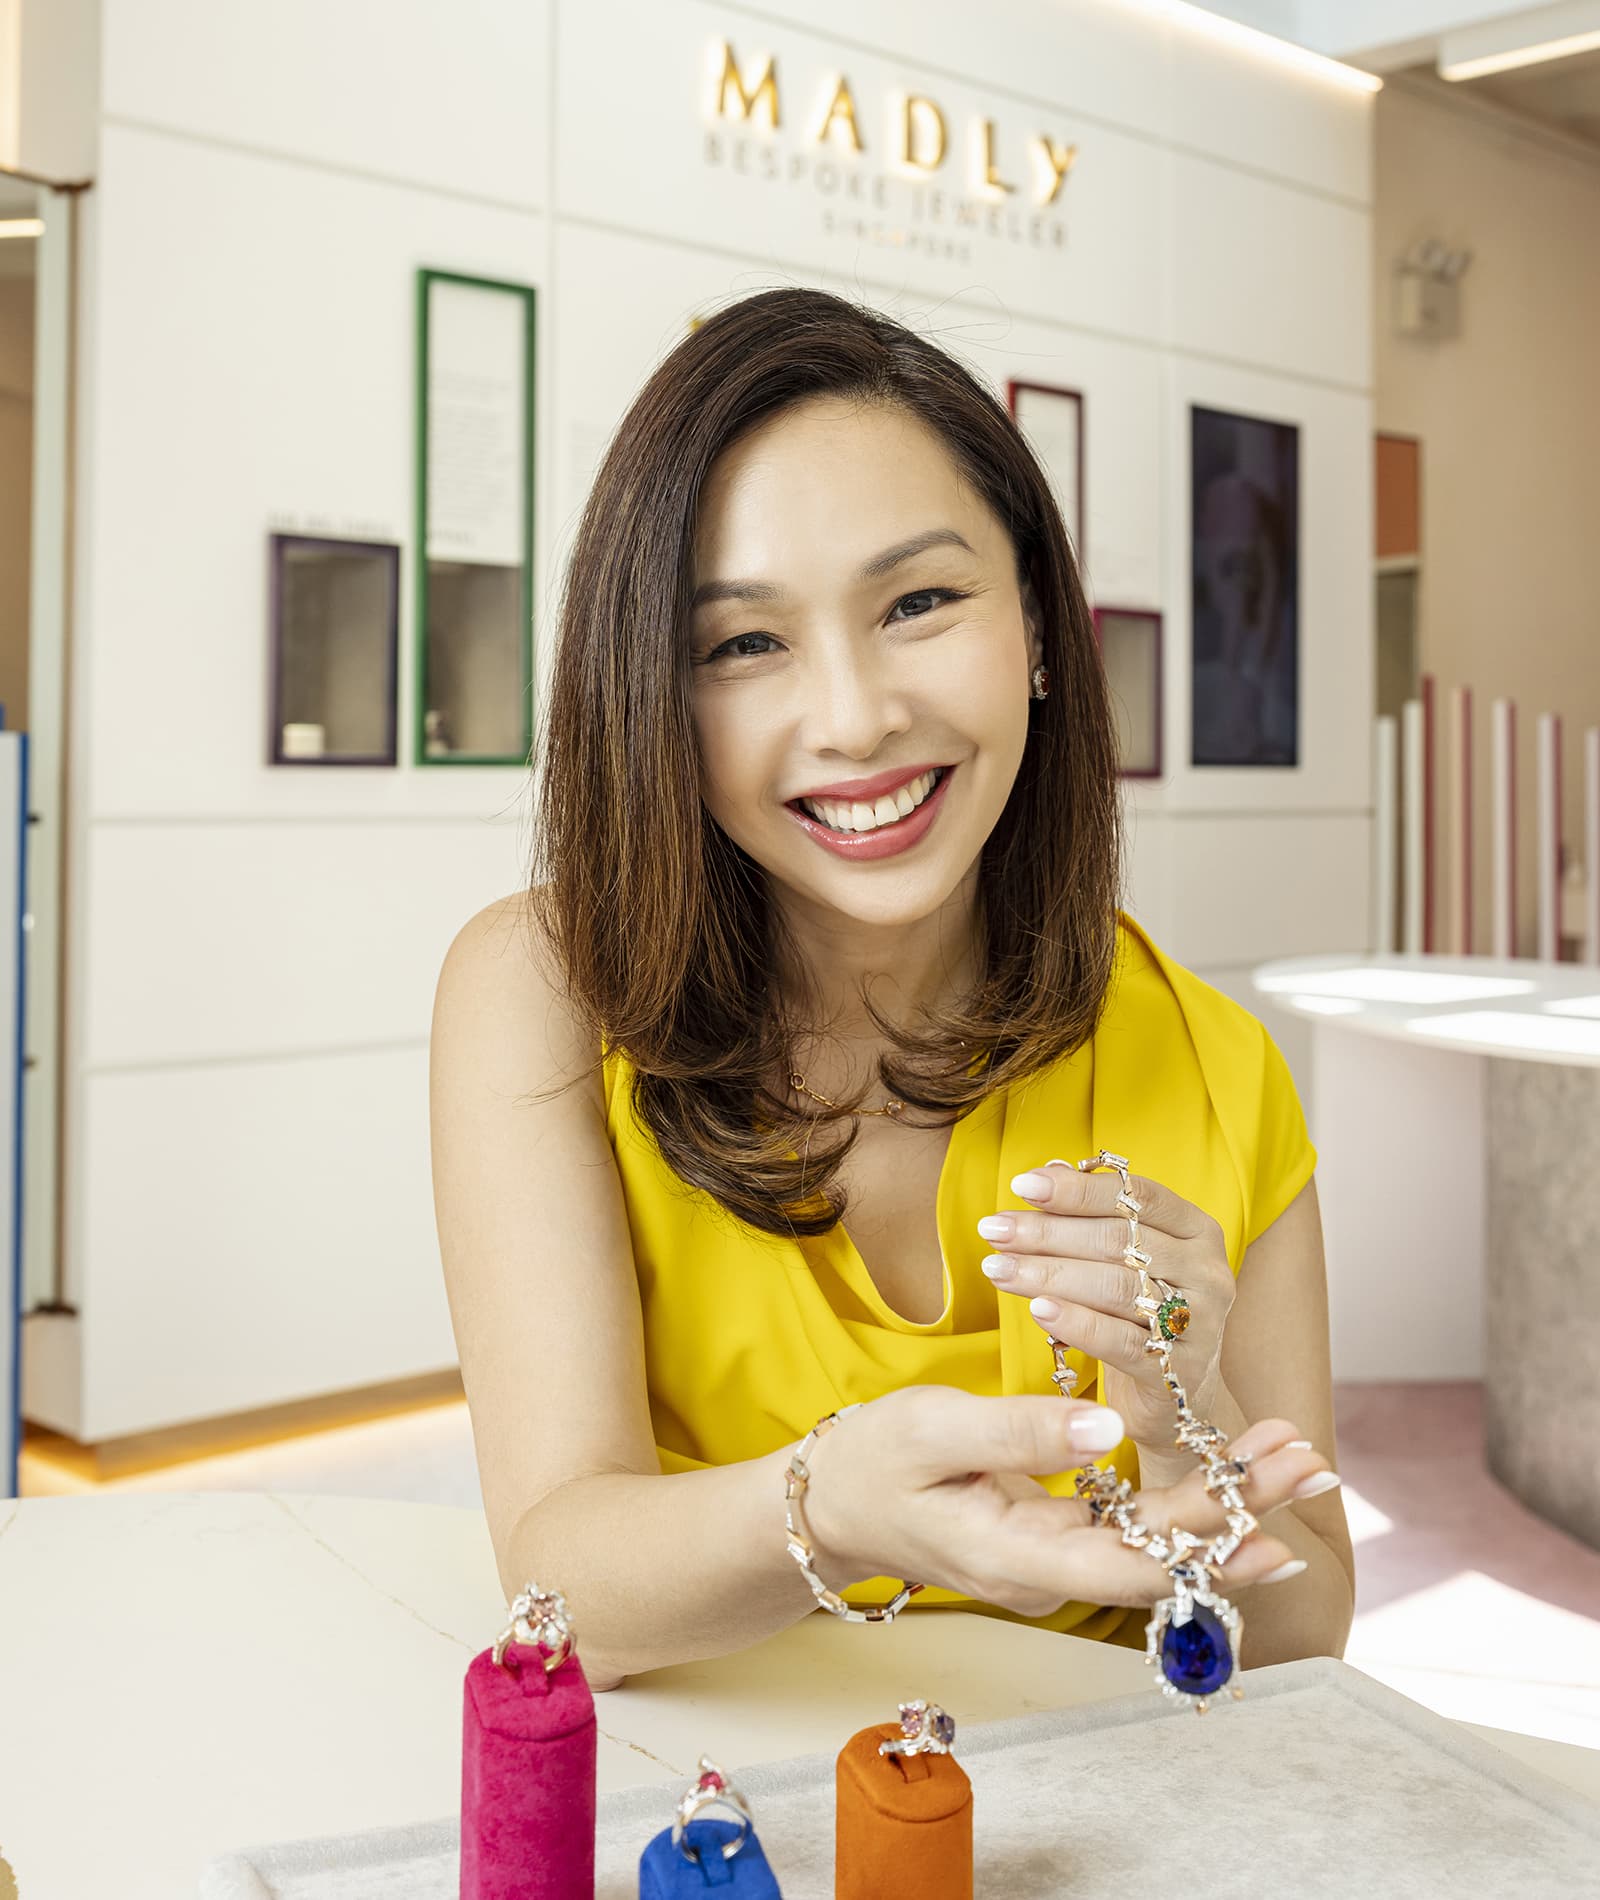 MADLY founder, Maddy barber, holding a MADLY tanzanite and diamond High Jewellery necklace 